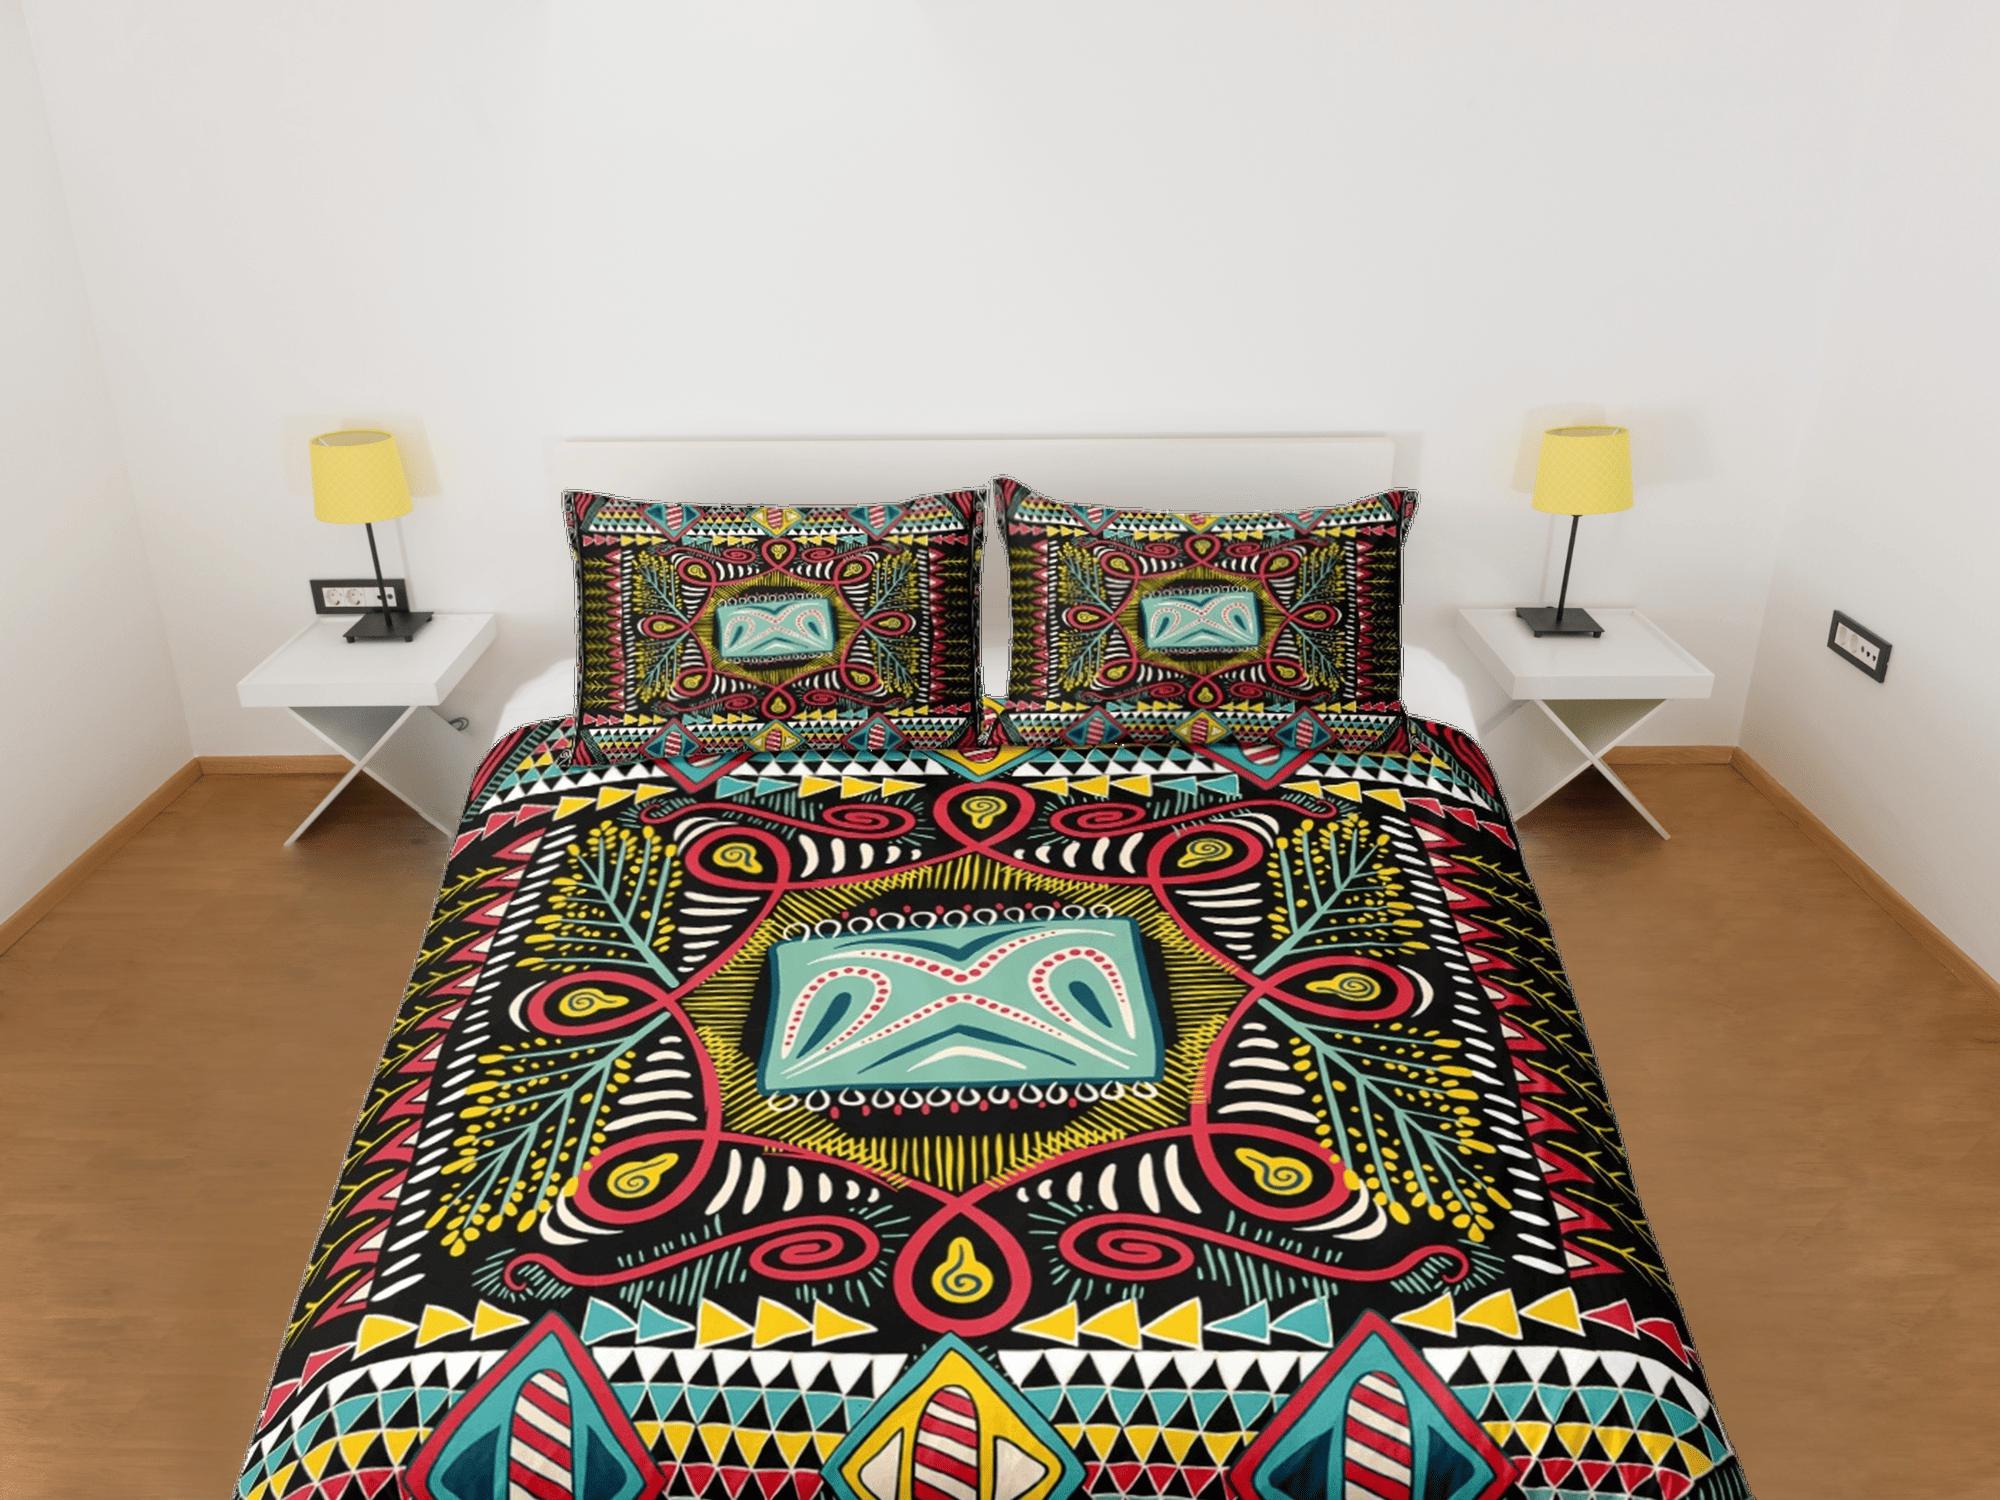 daintyduvet Colorful abstract african pattern bedding set duvet cover, boho bedding ethnic tribal print afrocentric designer bedding, south african gift